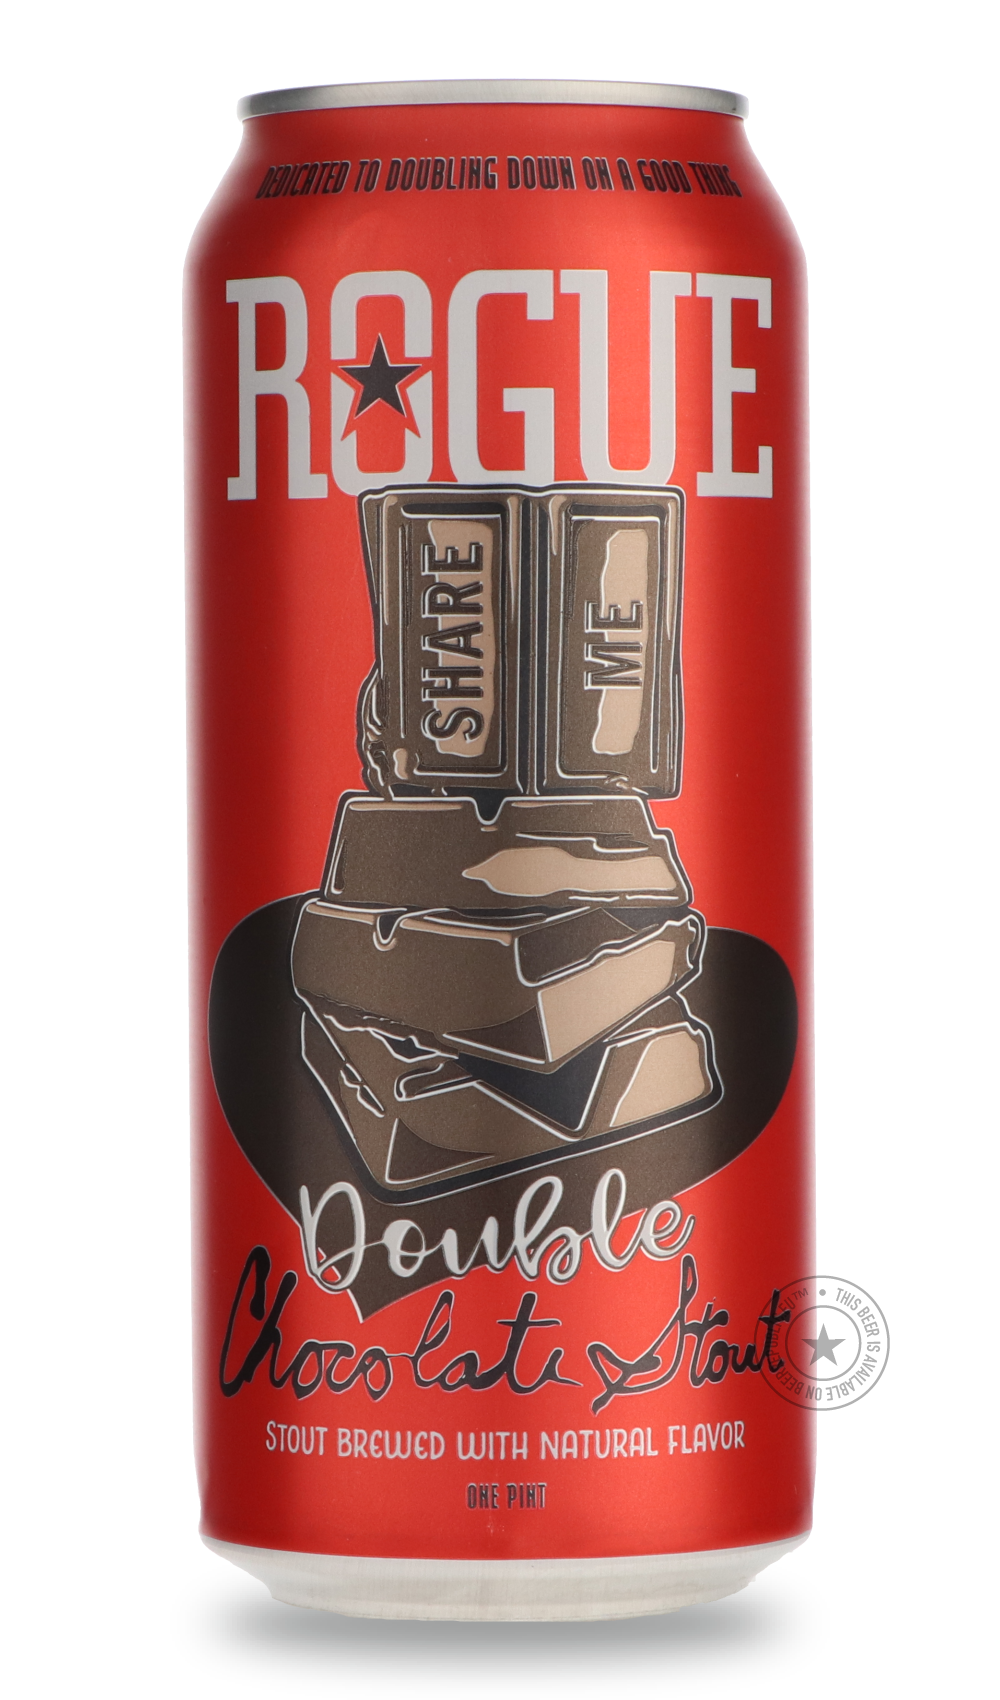 -Rogue- Double Chocolate Stout-Stout & Porter- Only @ Beer Republic - The best online beer store for American & Canadian craft beer - Buy beer online from the USA and Canada - Bier online kopen - Amerikaans bier kopen - Craft beer store - Craft beer kopen - Amerikanisch bier kaufen - Bier online kaufen - Acheter biere online - IPA - Stout - Porter - New England IPA - Hazy IPA - Imperial Stout - Barrel Aged - Barrel Aged Imperial Stout - Brown - Dark beer - Blond - Blonde - Pilsner - Lager - Wheat - Weizen -